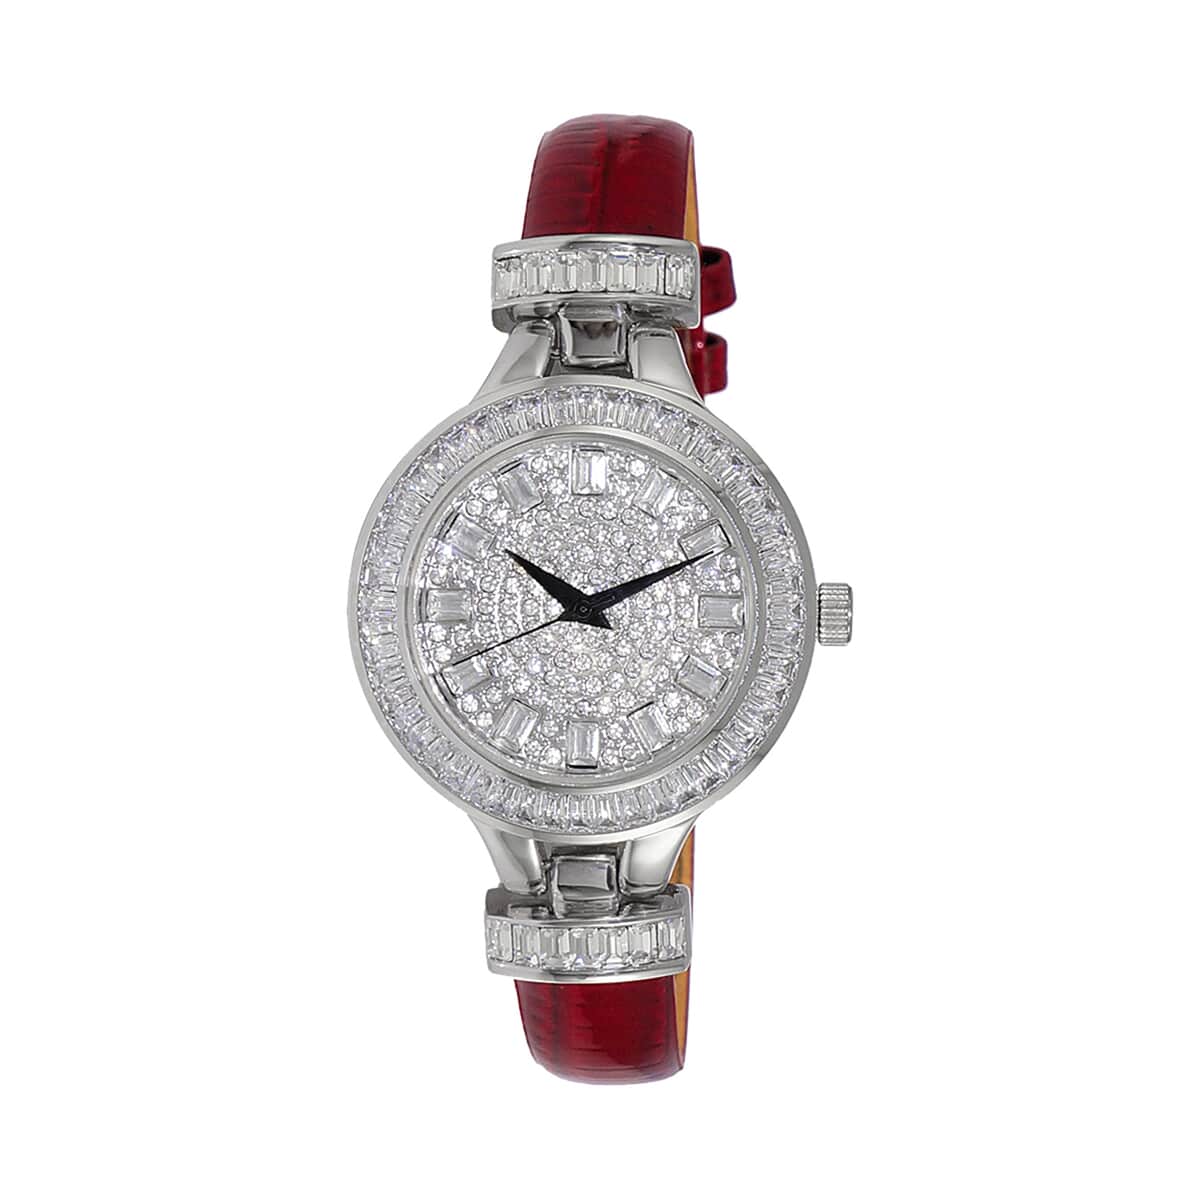 ADEE KAYE Austrian Crystal Japanese Movement Watch in Silvertone and Red Leather Strap (33 mm) image number 0